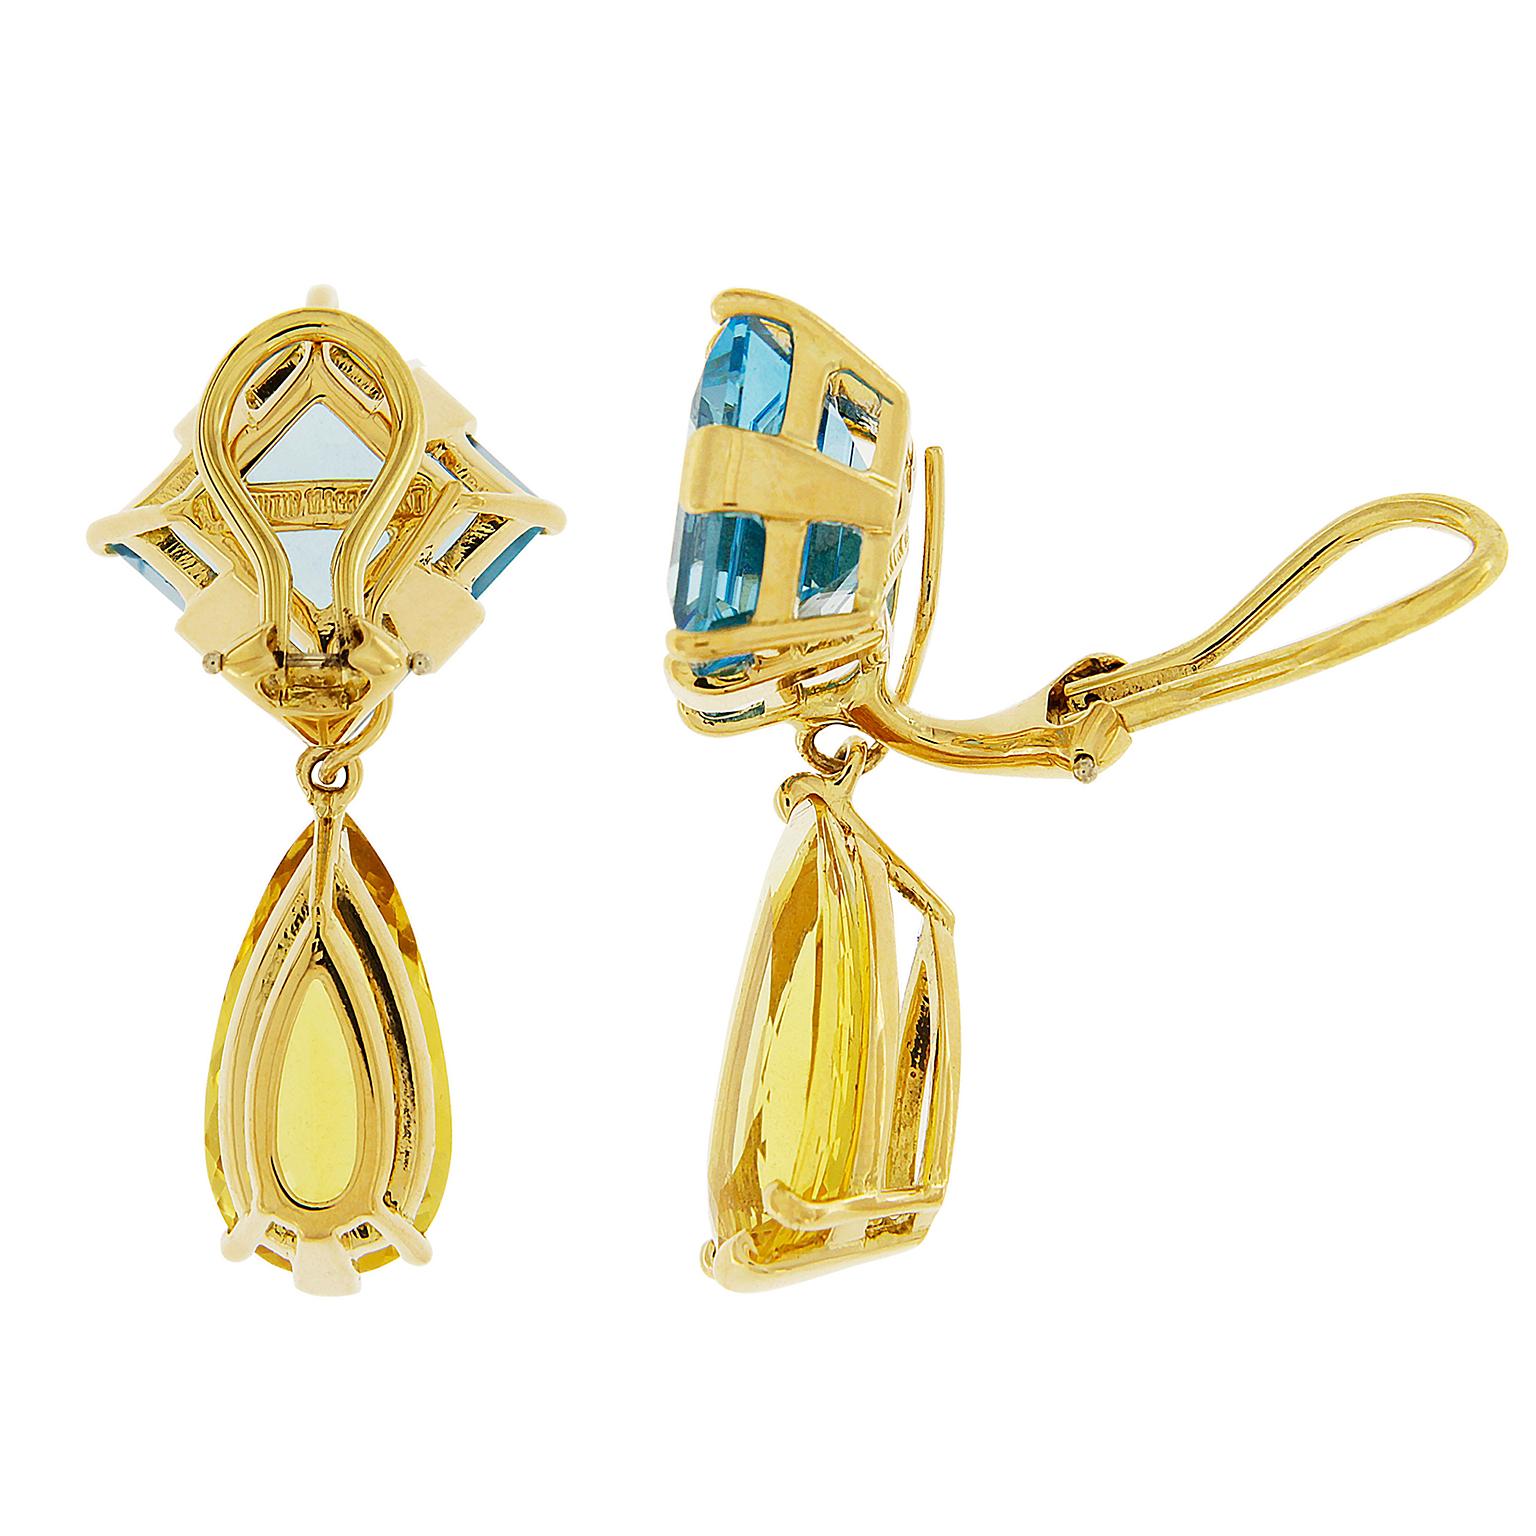 Blue and gold make these bright drop earrings. The base is made of square-shaped blue topaz, set at an angle in 18k yellow gold. Underneath is an elongated pear-shaped citrine. A delicate gold ball rests between the gemstones. These earrings are